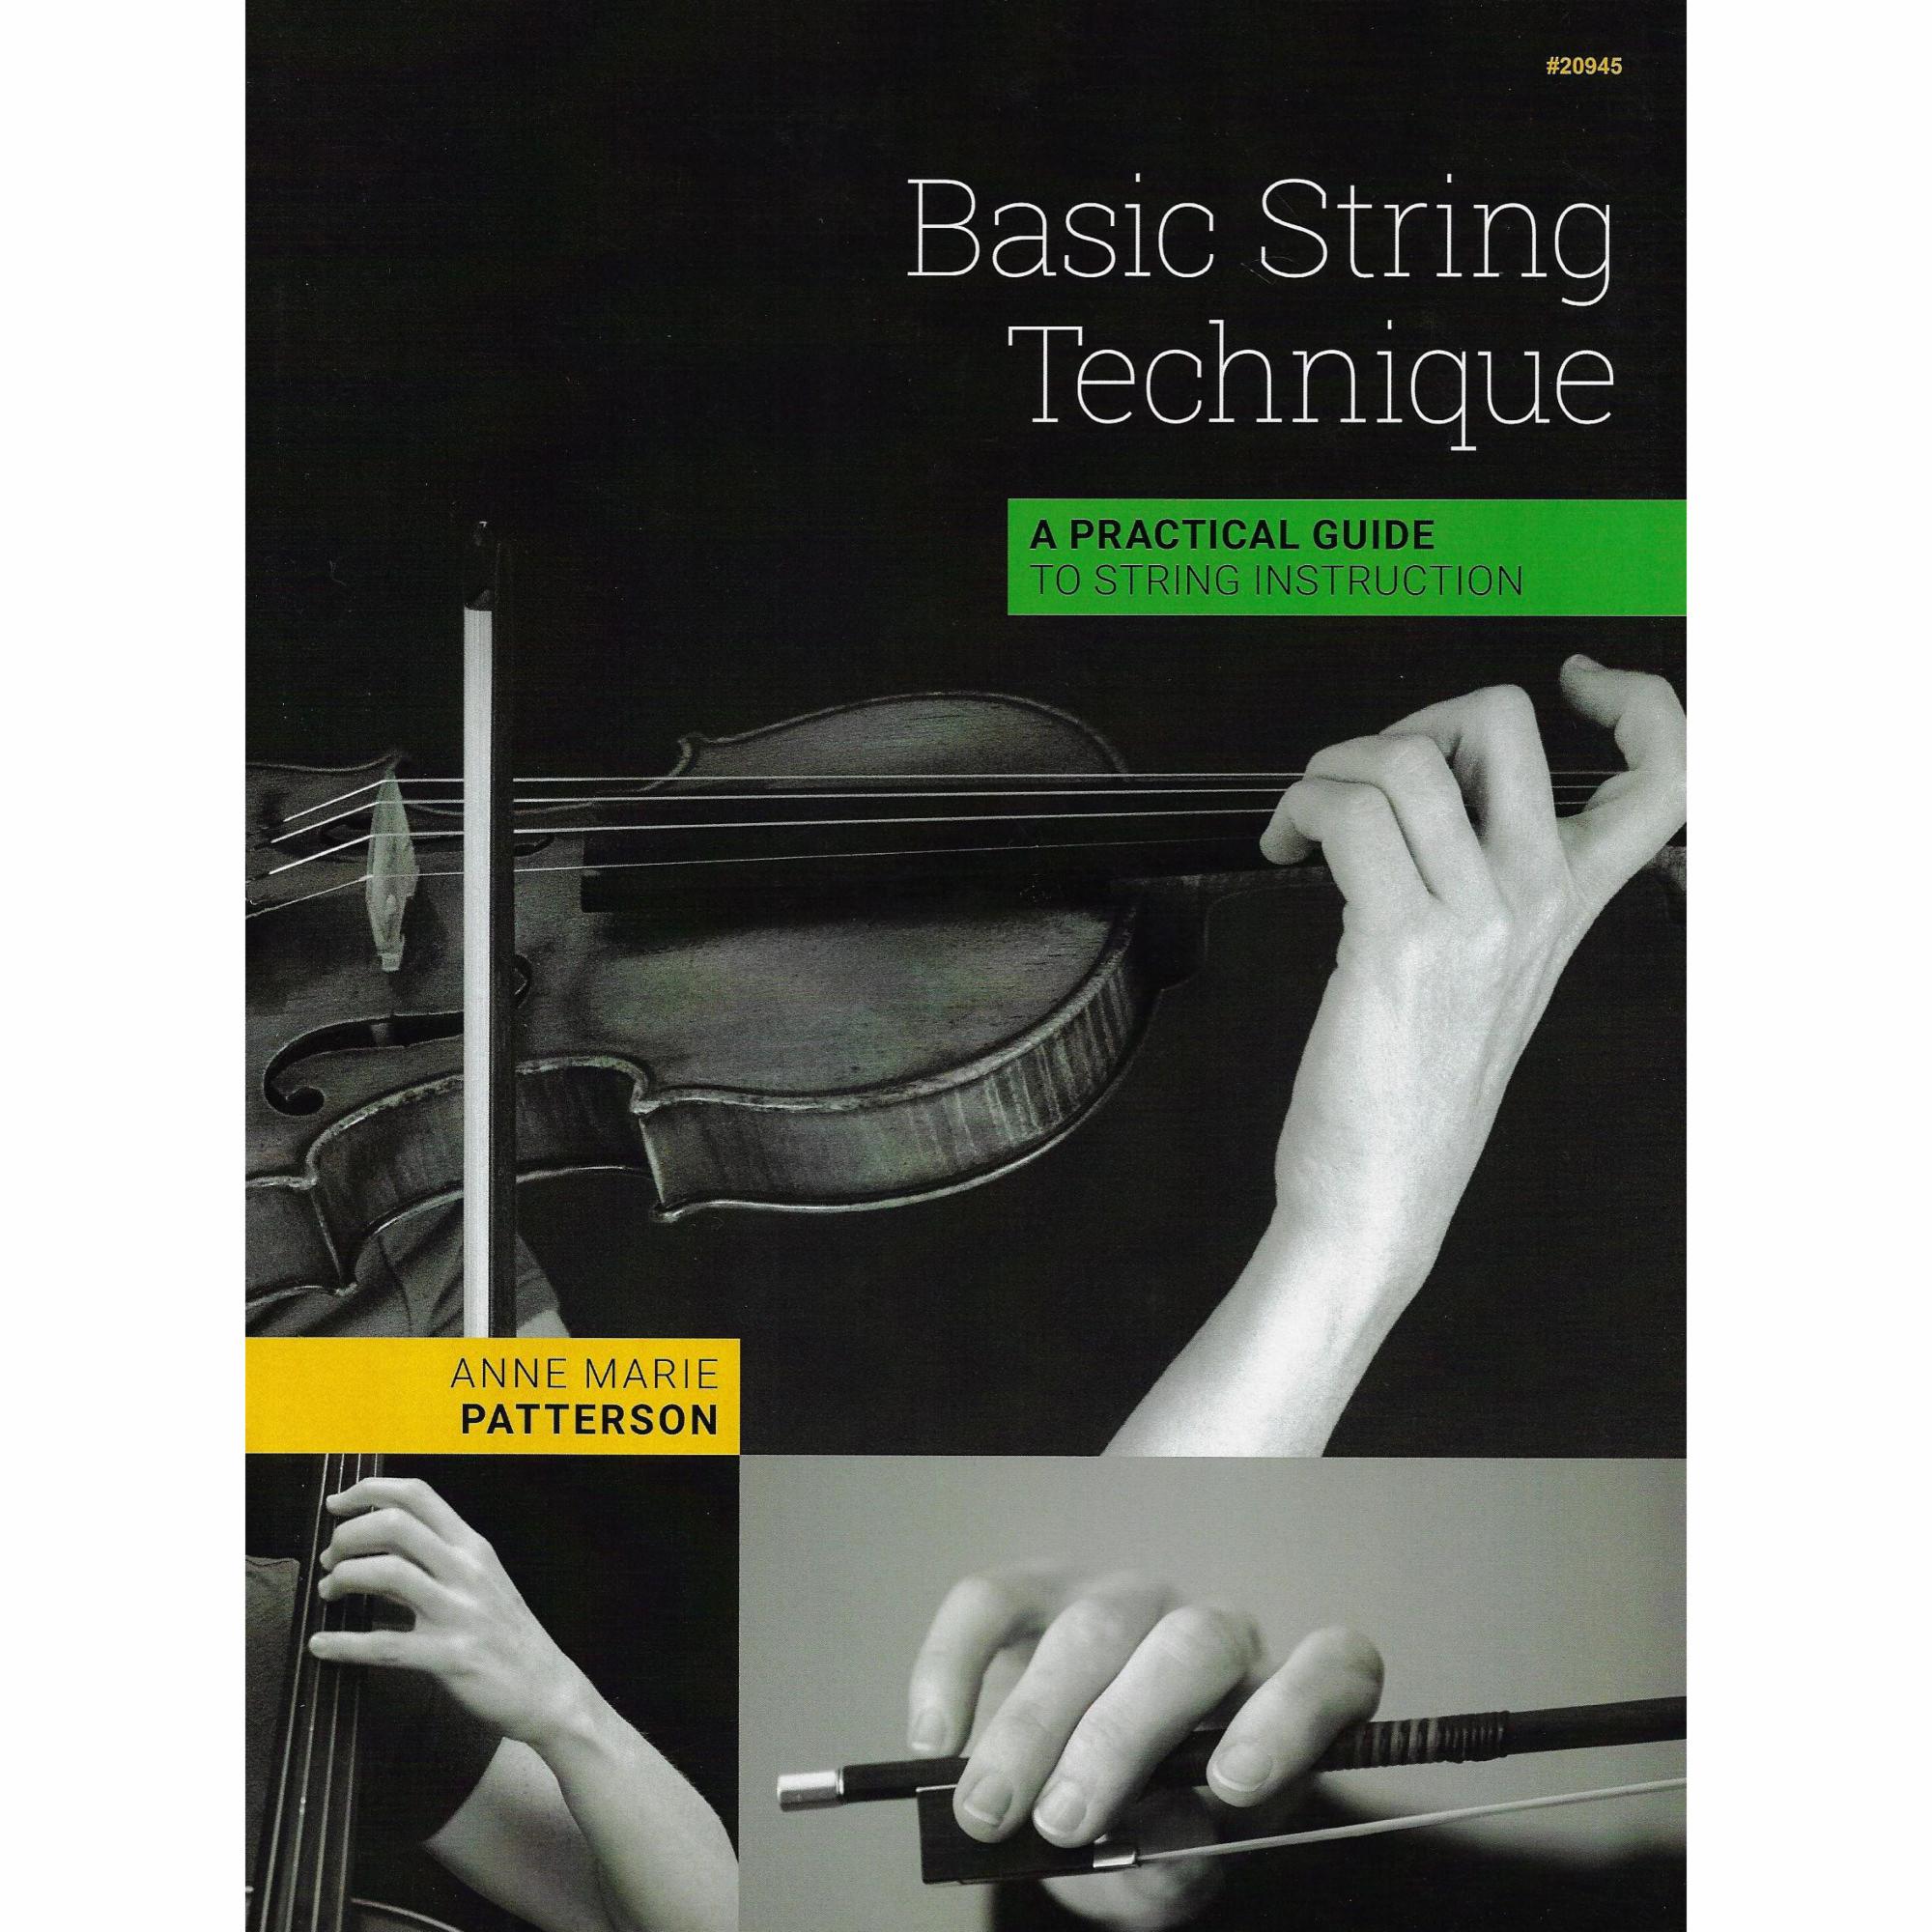 Basic String Technique: A Practical Guide to String Instruction